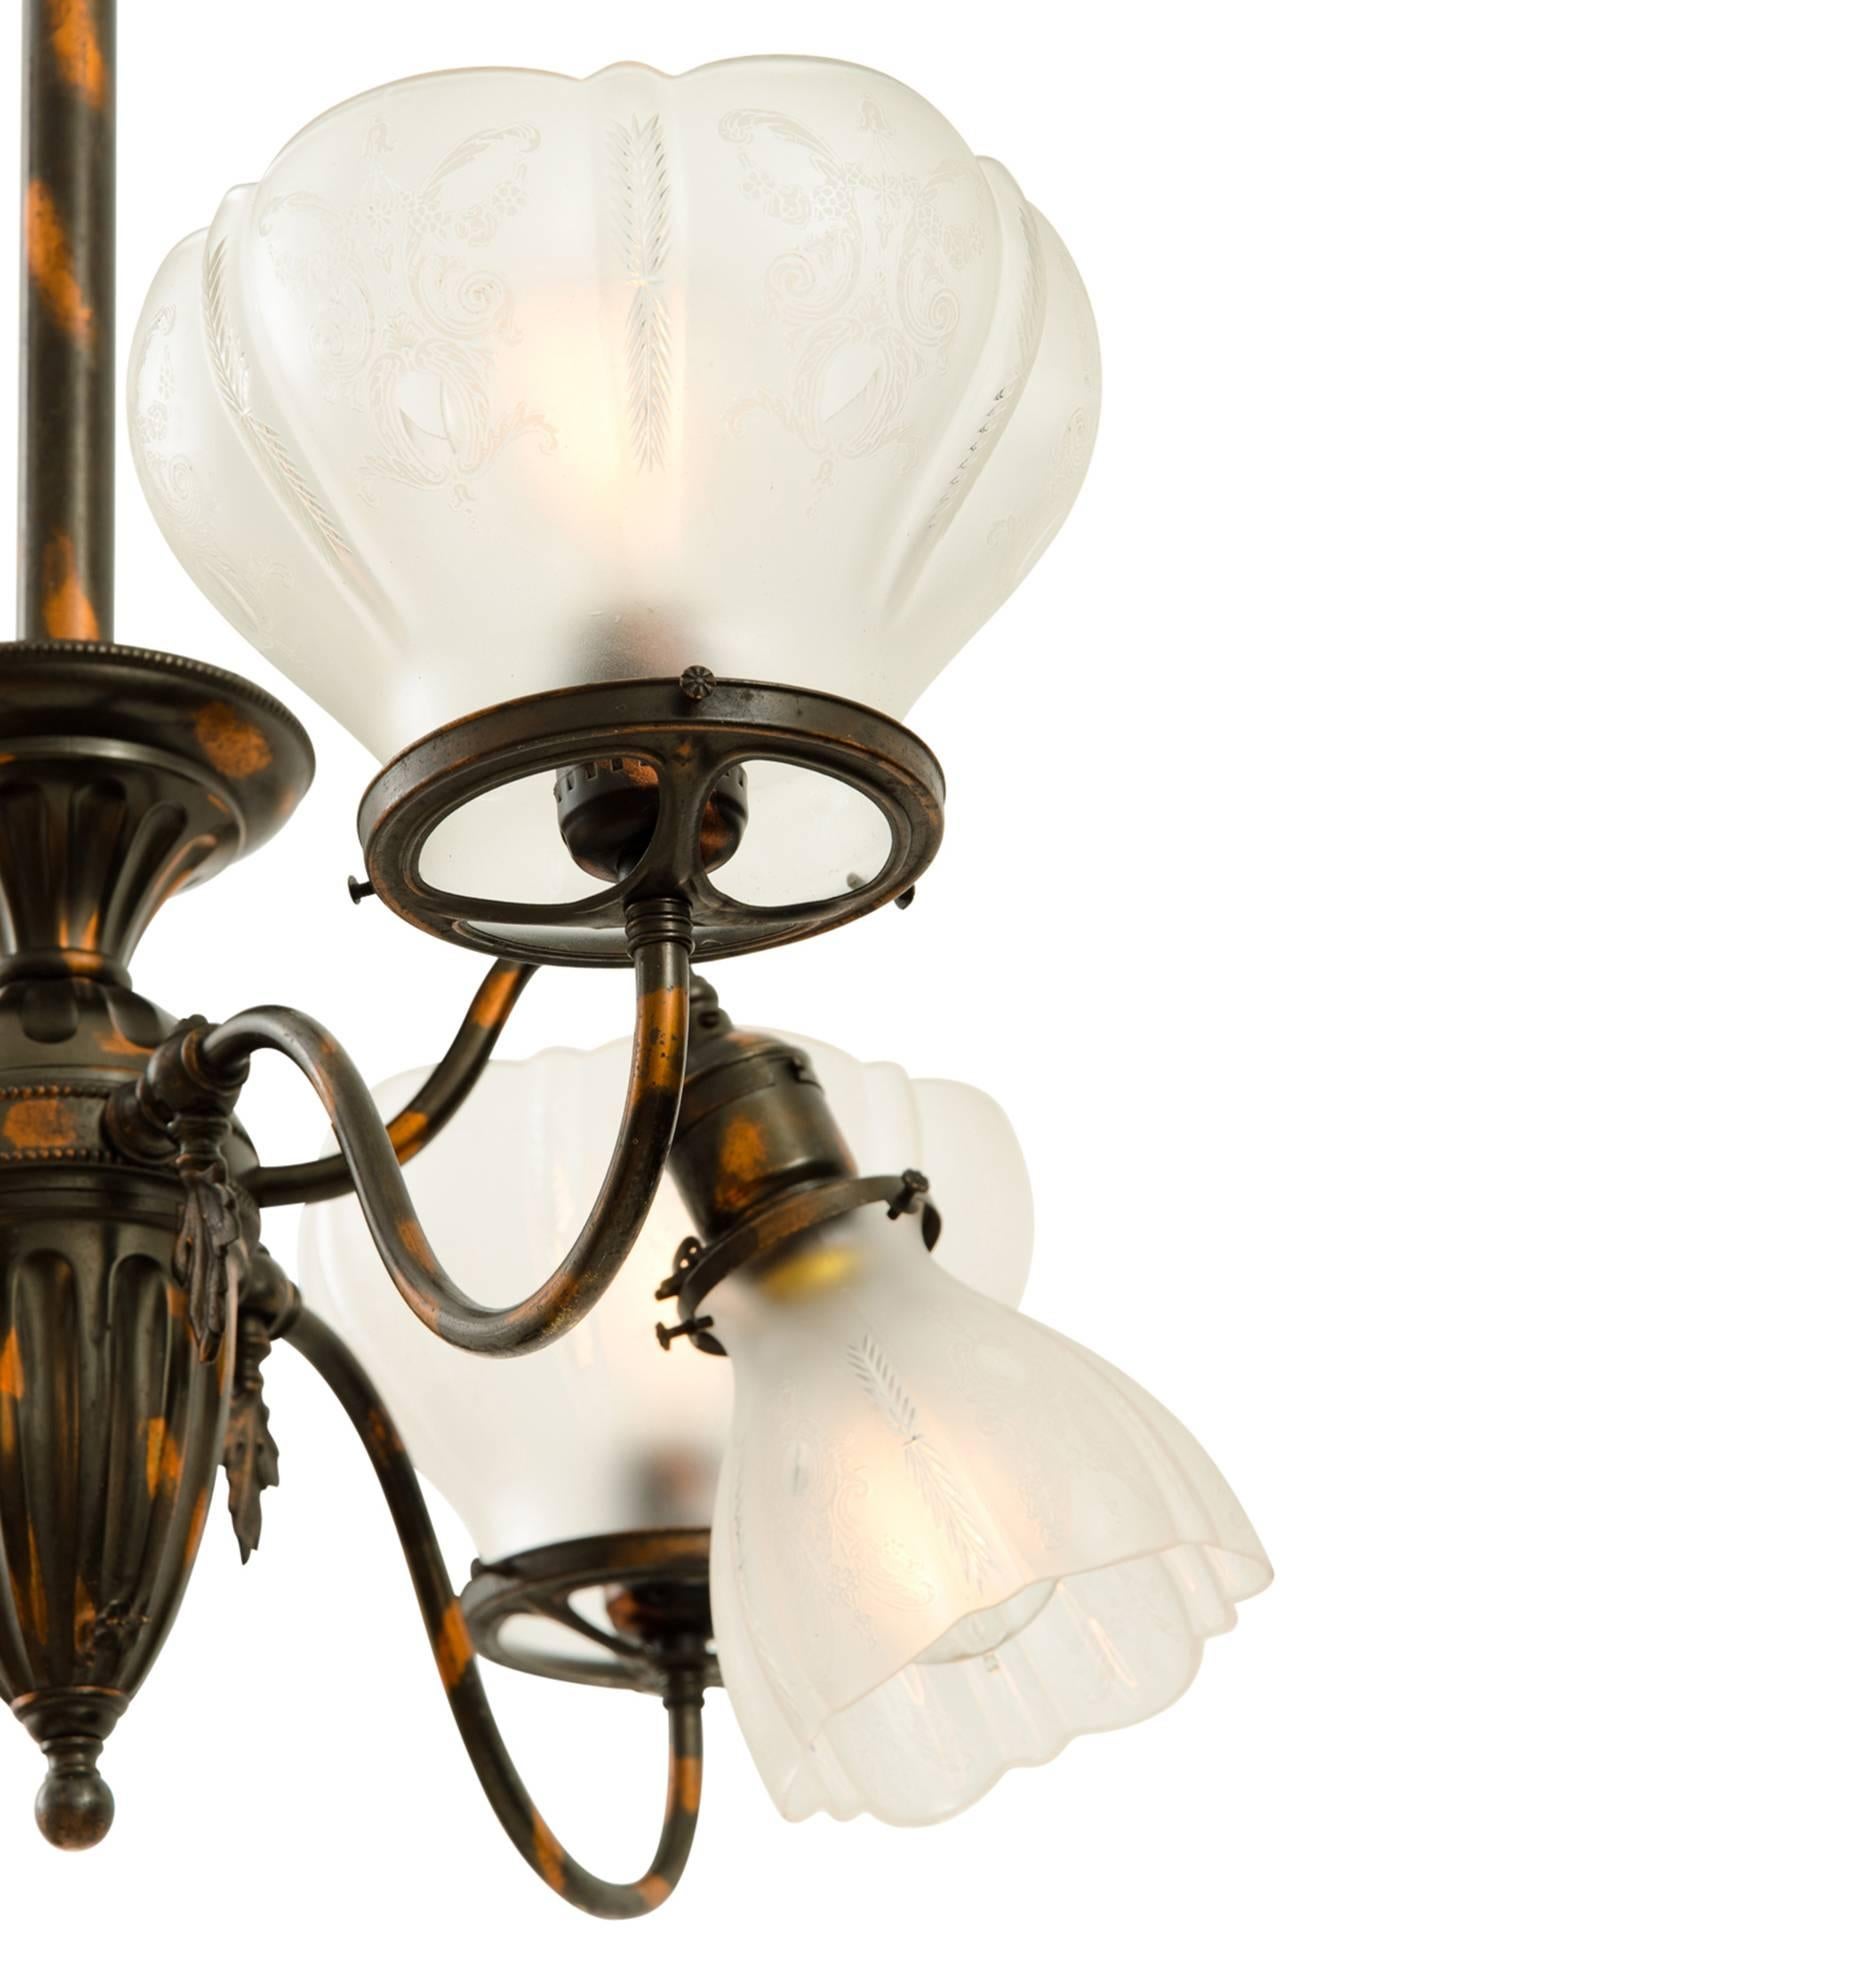 Early 20th Century Transitional Six-Light Chandelier with Japanned Copper Finish, circa 1905